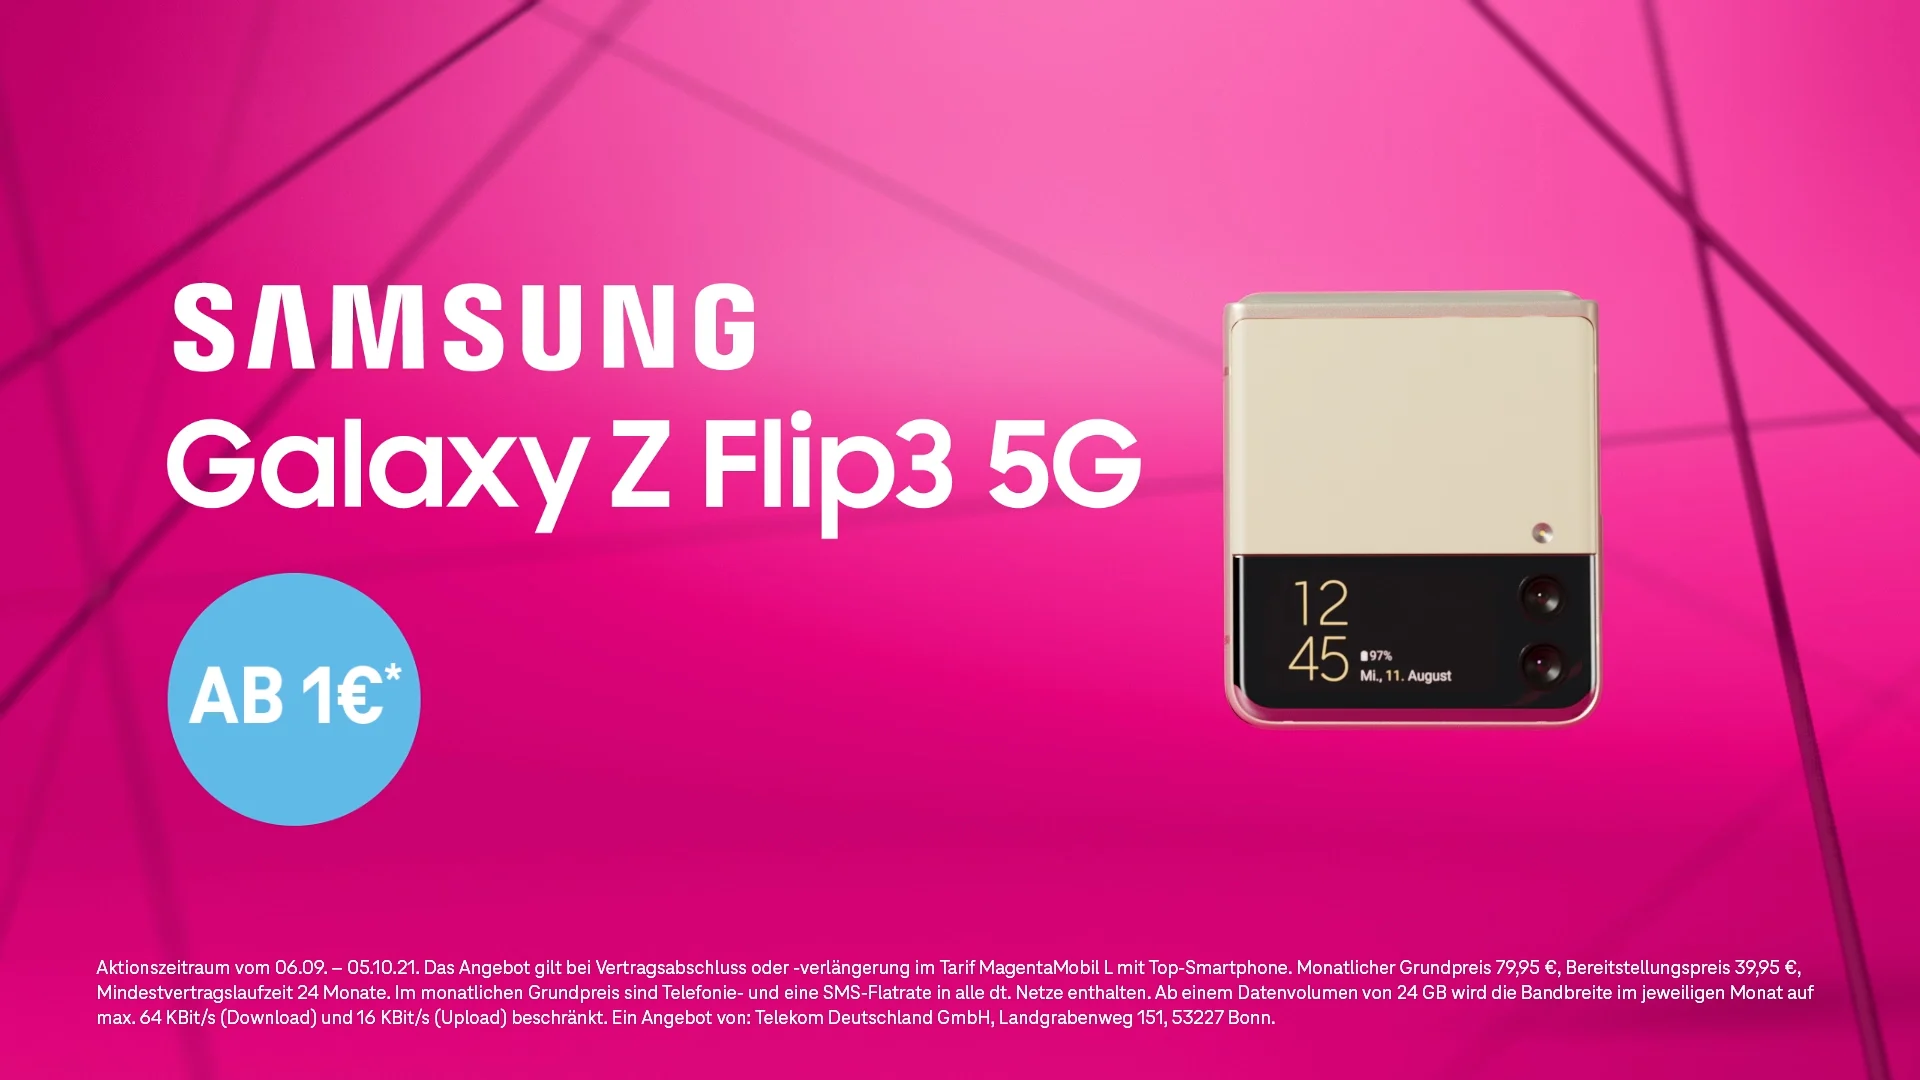 Closed golden Samsung ZFlip3 5G in front of an abstract magenta room on the right side and the product description on the right side